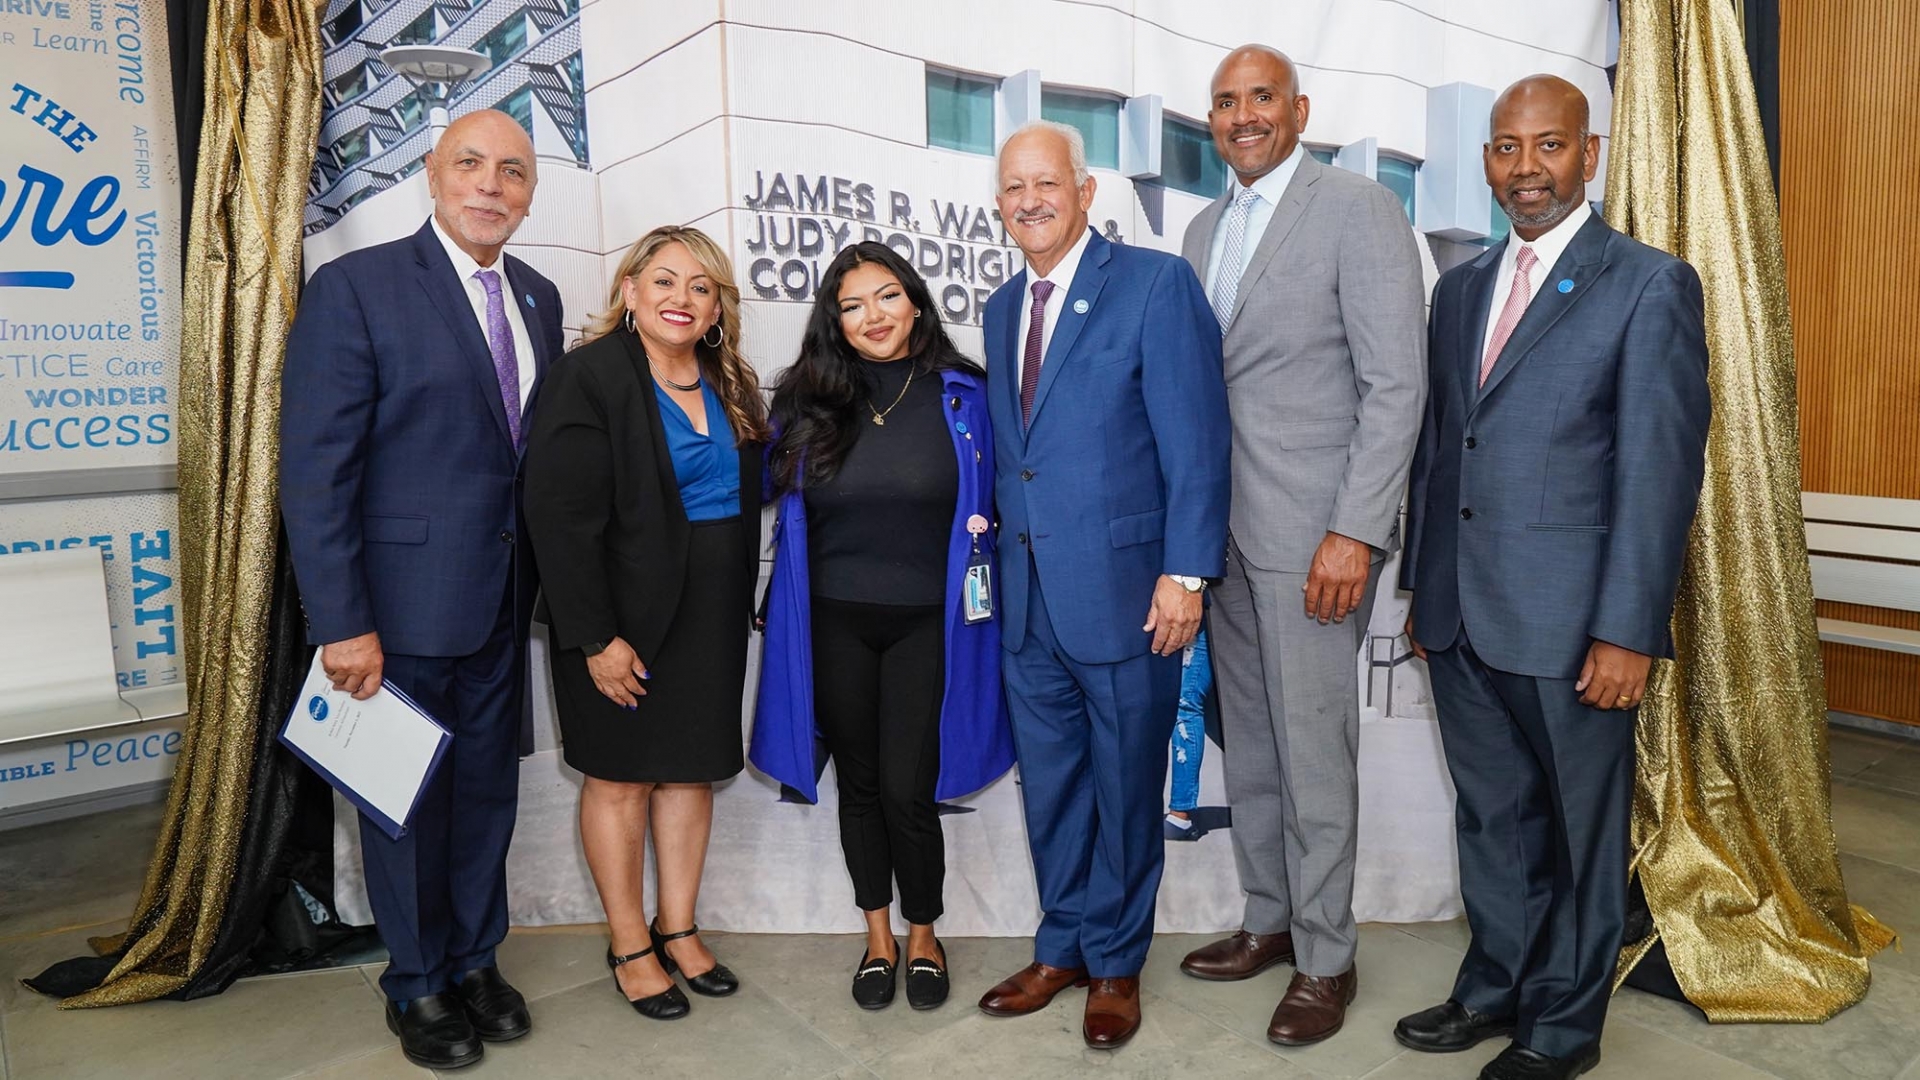 From left, Robert Nava, vice president of University Advancement; Paz Olivérez, vice president of Student Affairs; CSU Student Trustee Diana Aguilar-Cruz; CSUSB President Tomás D. Morales; Rafik Mohamed, interim provost and vice president of Academic Affairs; and Samuel Sudhakar, vice president of Information Technology Services and chief information officer.